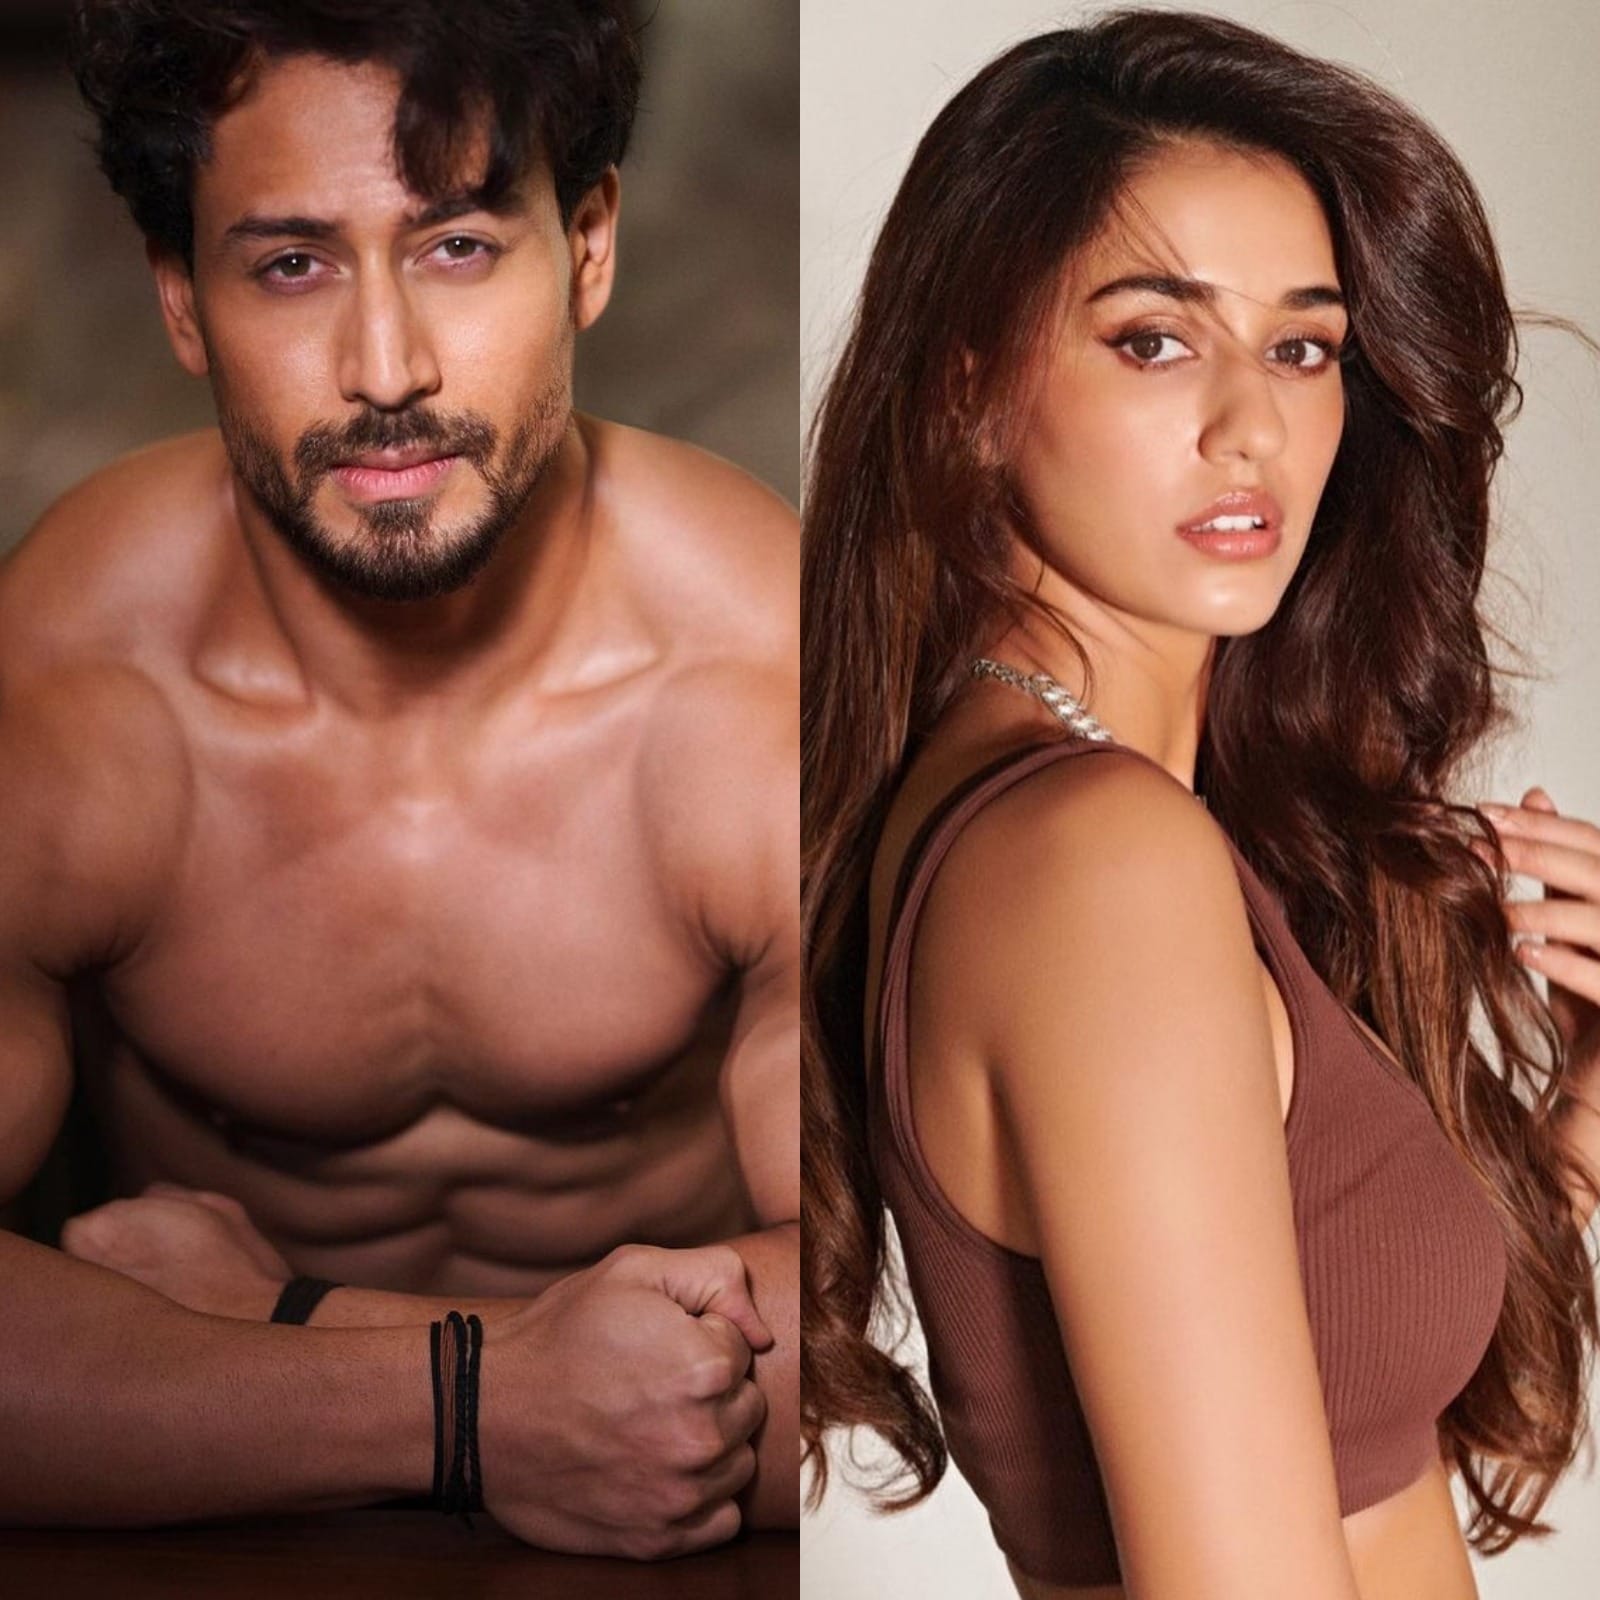 Tiger Shroff Ka Xxx Video - Tiger Shroff Shares BTS Video Featuring 'Neck Bursting, Back Breaking'  Action Sequence; Disha Patani Says 'Crazy You Are' - News18